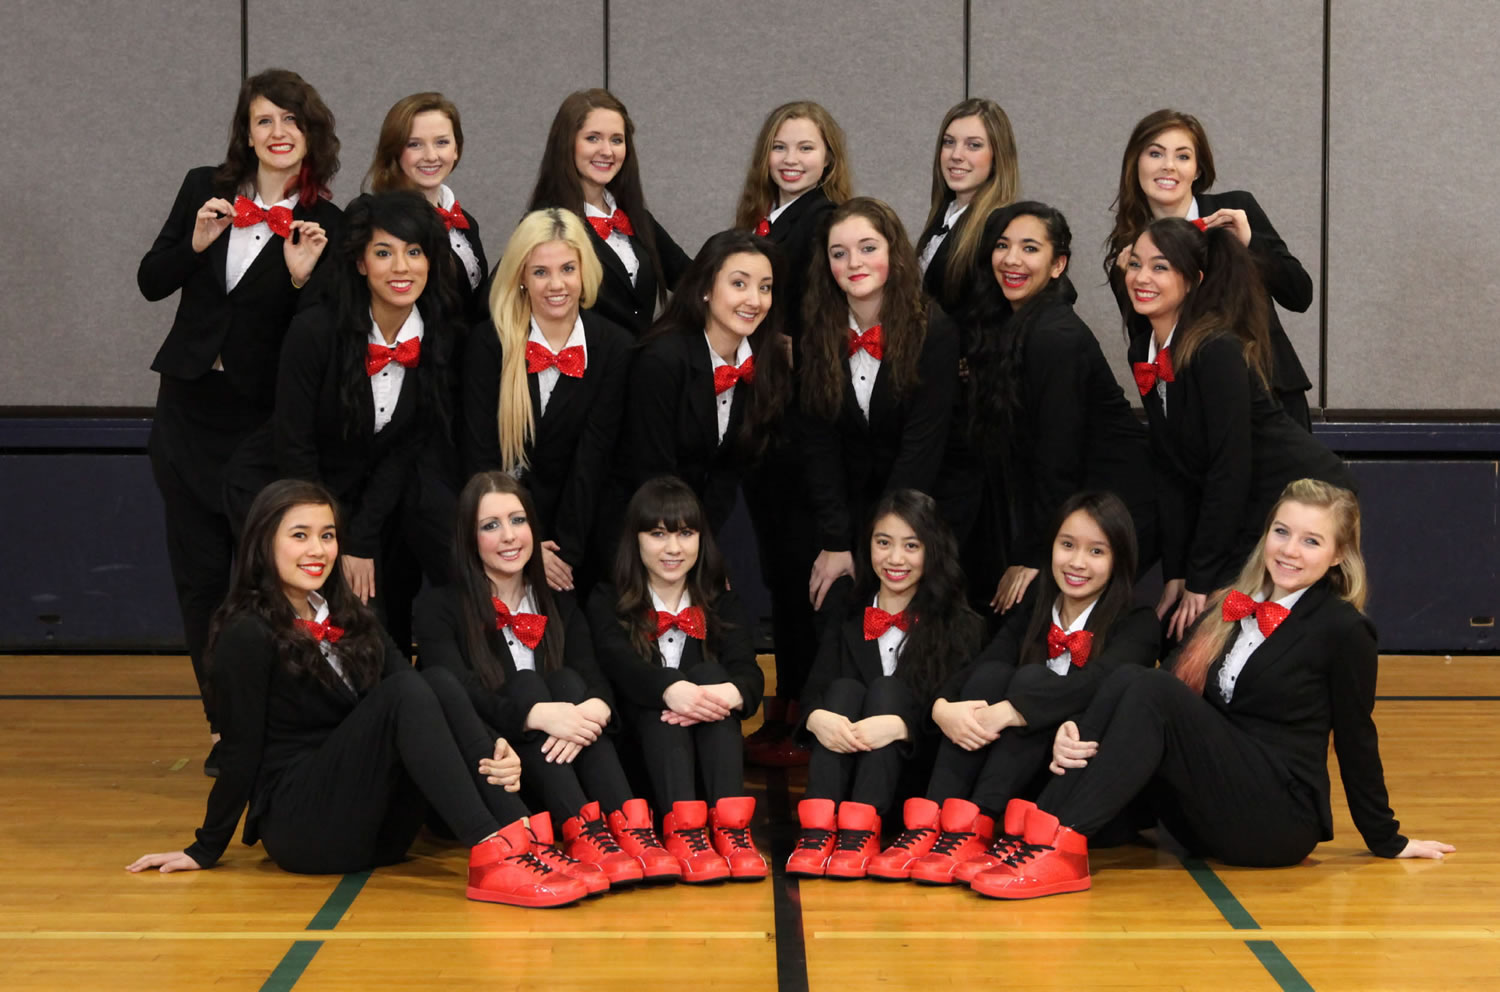 Contributed photos
The Camas High School dance team qualified for the state competition Friday and Saturday, at the Yakima Sun Dome. Their hip-hop routine pays homage to the movie &quot;Happy Feet.&quot;